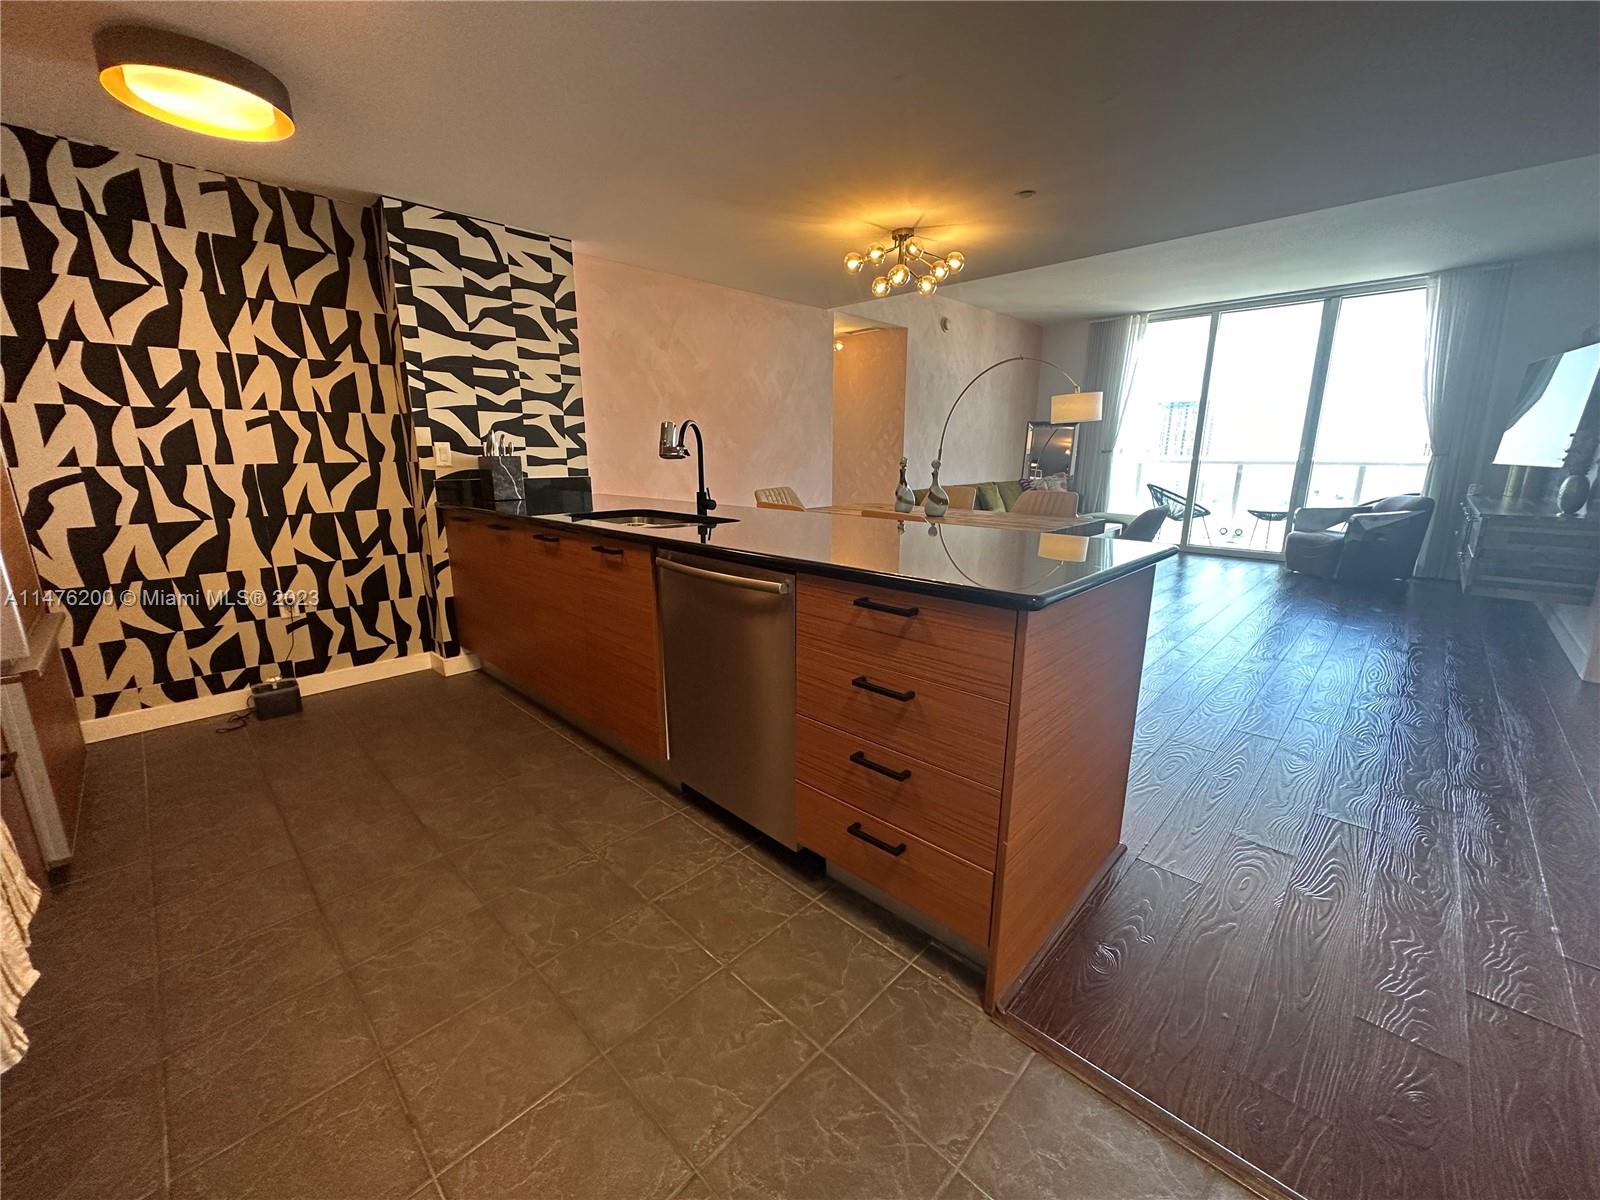 Beautiful high floor 2 bedroom, 2 bathroom corner unit with floor to ceilings windows and a wrap around balcony. Views of Biscayne bay and the city. The kitchen offers granite countertops, stainless steel appliances, and plenty of cabinet space. A great location to live, walking distance to Whole Foods Market and many restaurants. Close to the beaches and Miami international airport. Unit is available furnished or not furnished. Please call the listing agent for showings.